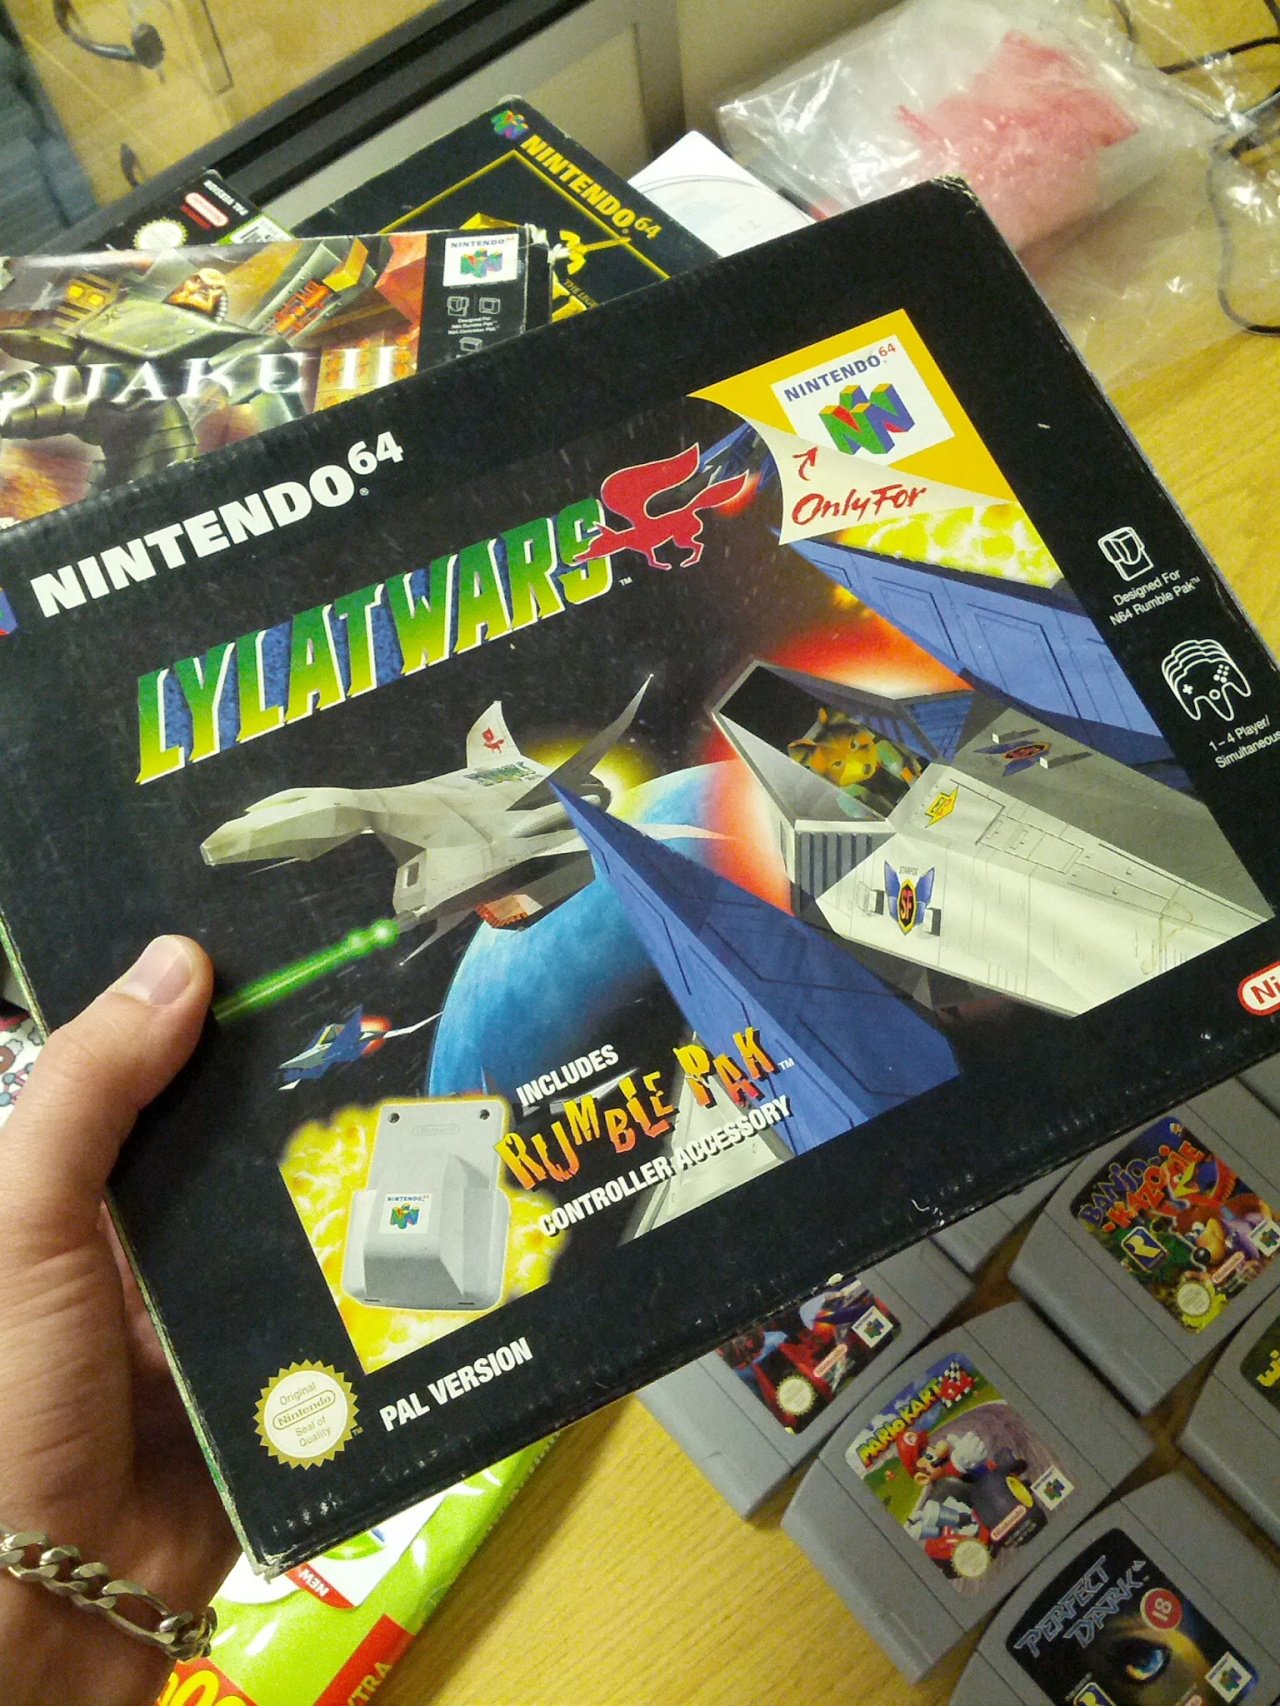 Star Fox 64' lands on the Wii U Virtual Console this week